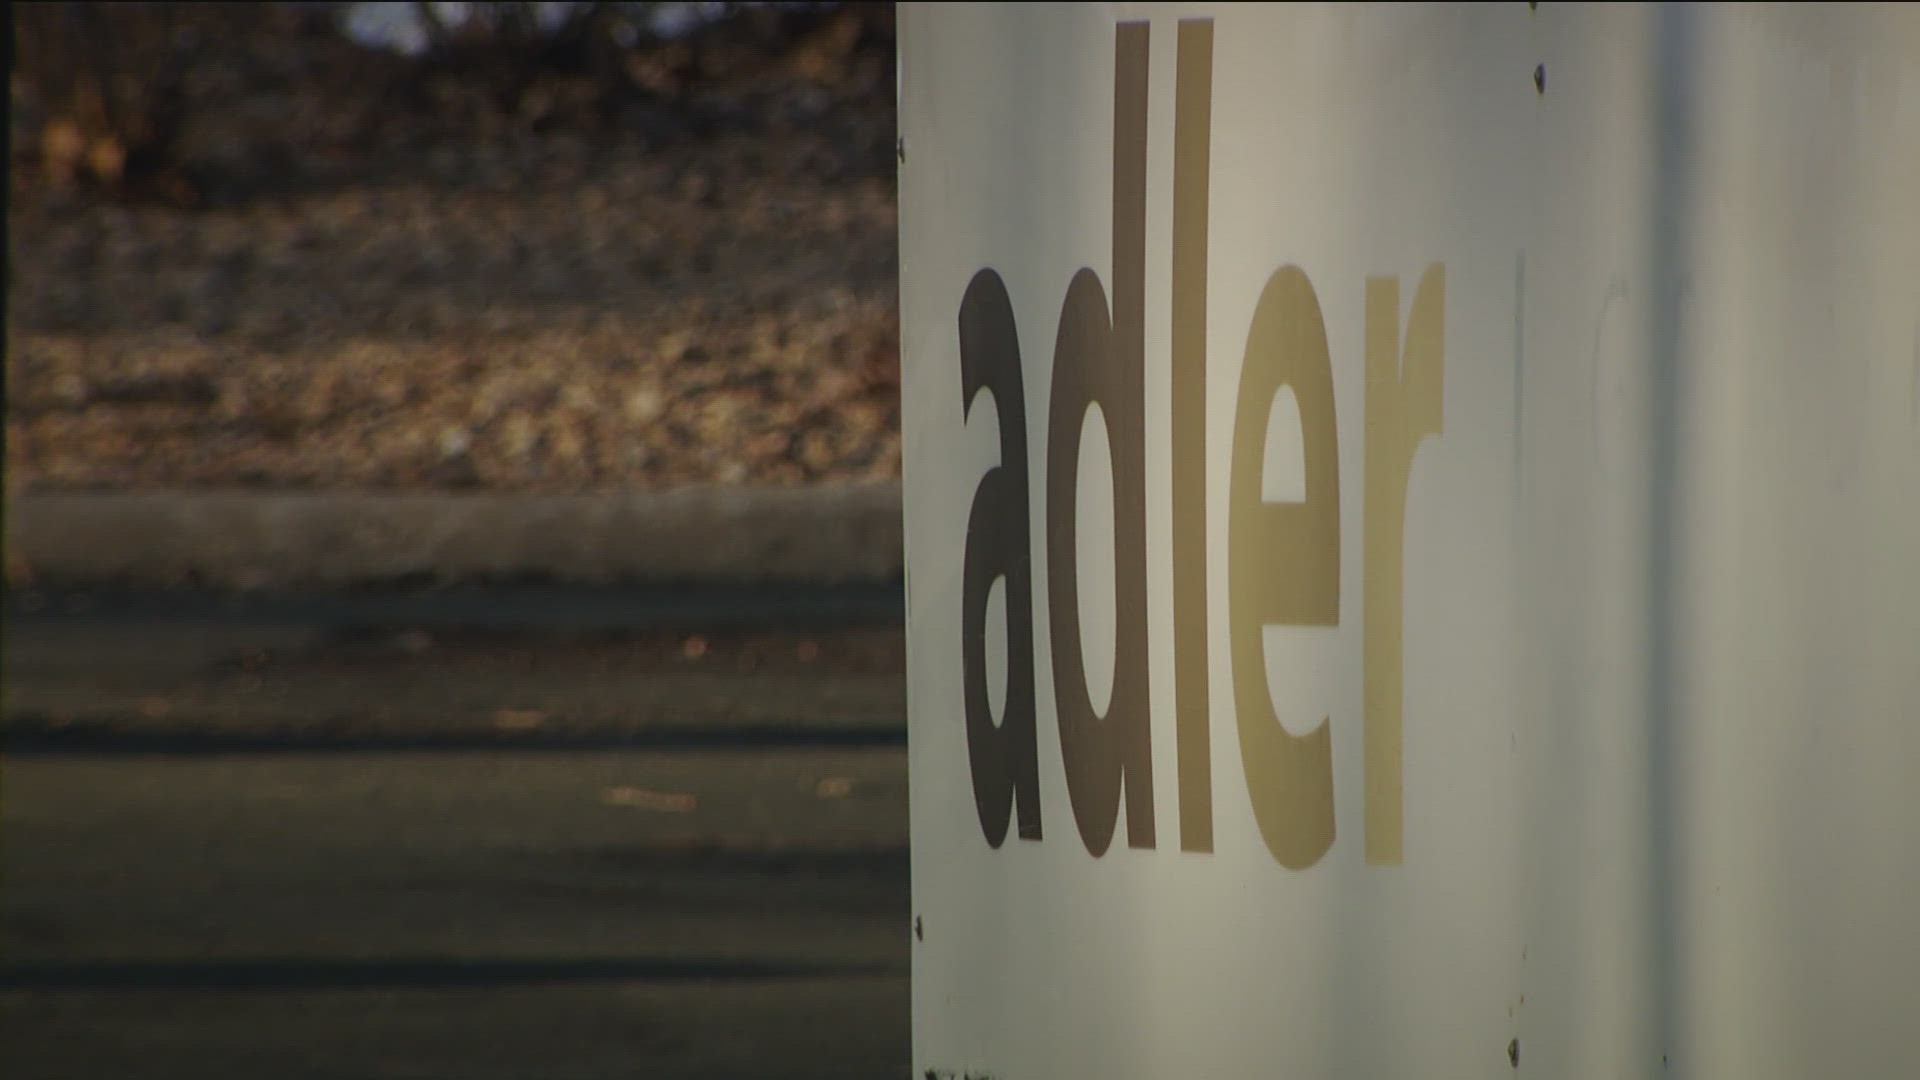 Adler Graduate School in Minnetonka is training 150 therapists over the next two years, to help them understand specific needs of law enforcement and their families.